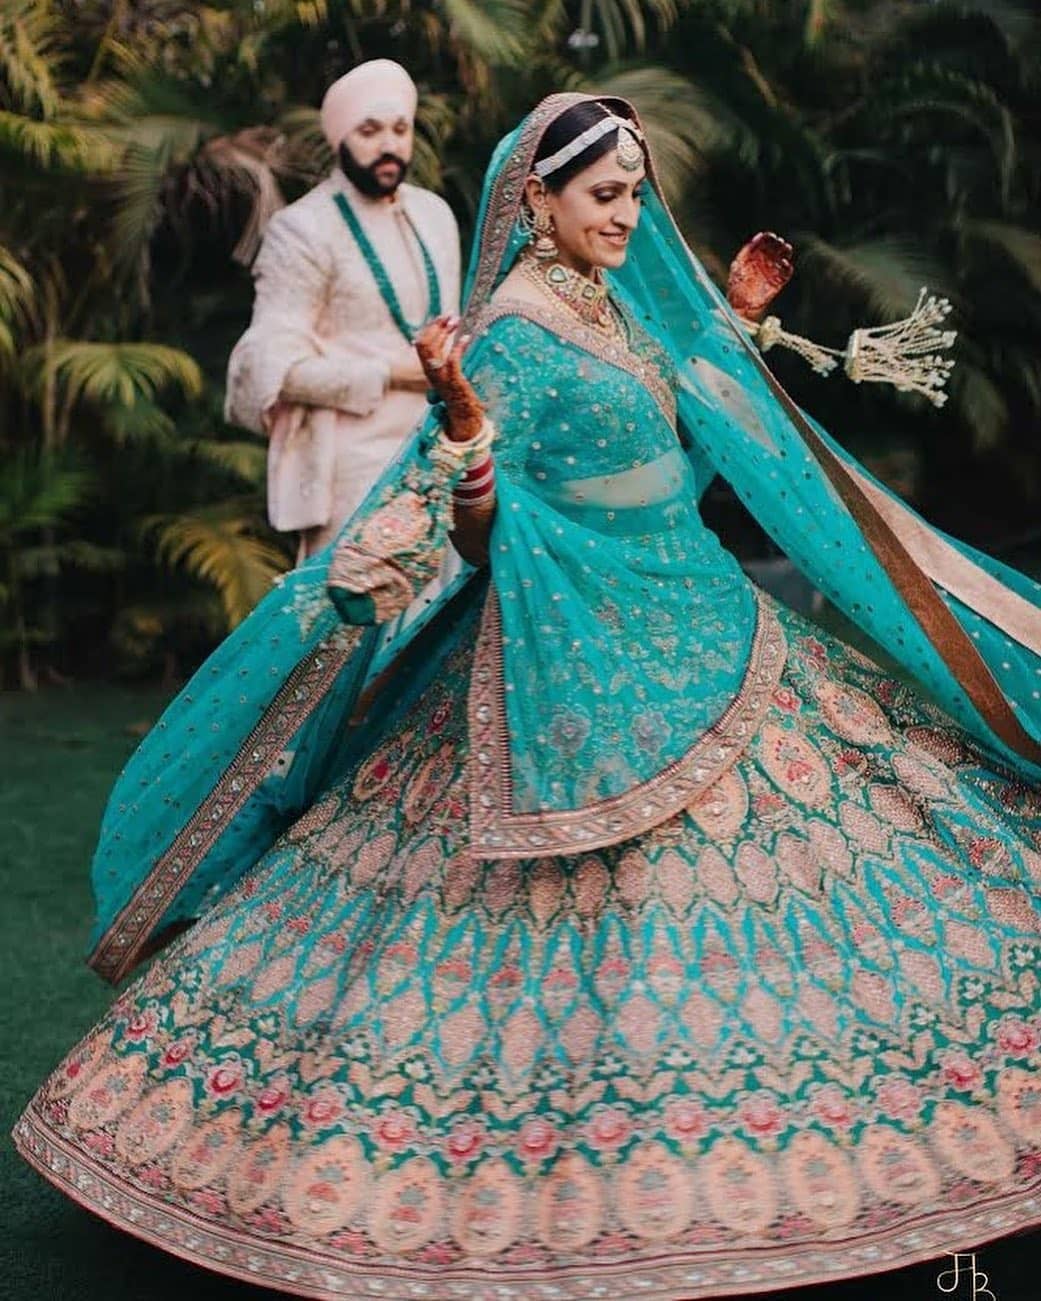 Stunning Gujarati Brides And Their Traditional Sarees